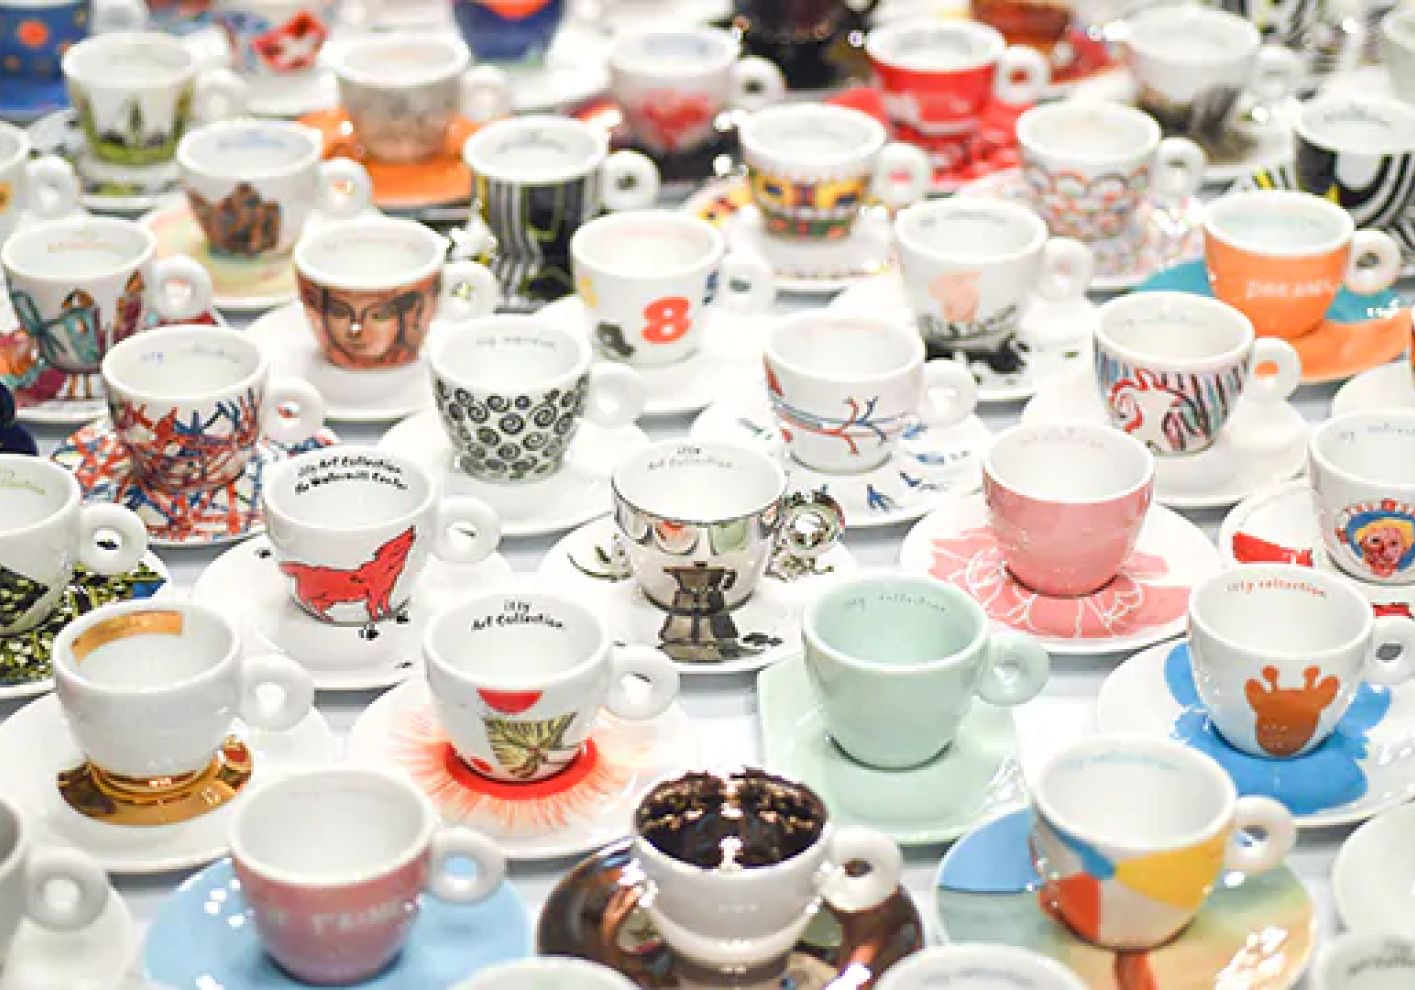 illy’s ever-expanding Art Collection of coffee cups